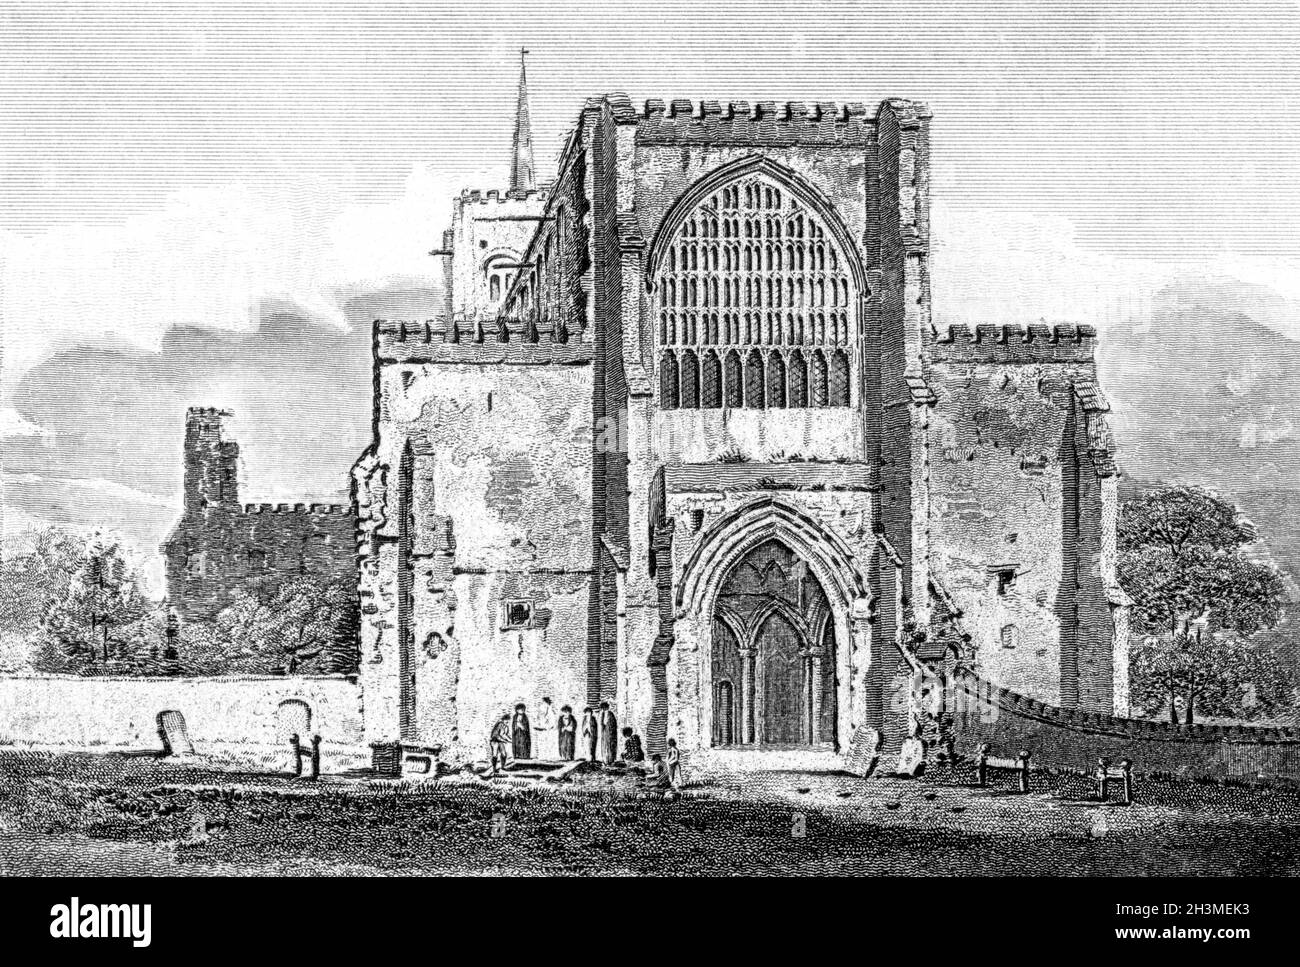 An engraving of St Albans Abbey Church, Hertfordshire UK scanned at high resolution from a book printed in 1812.  Believed copyright free. Stock Photo